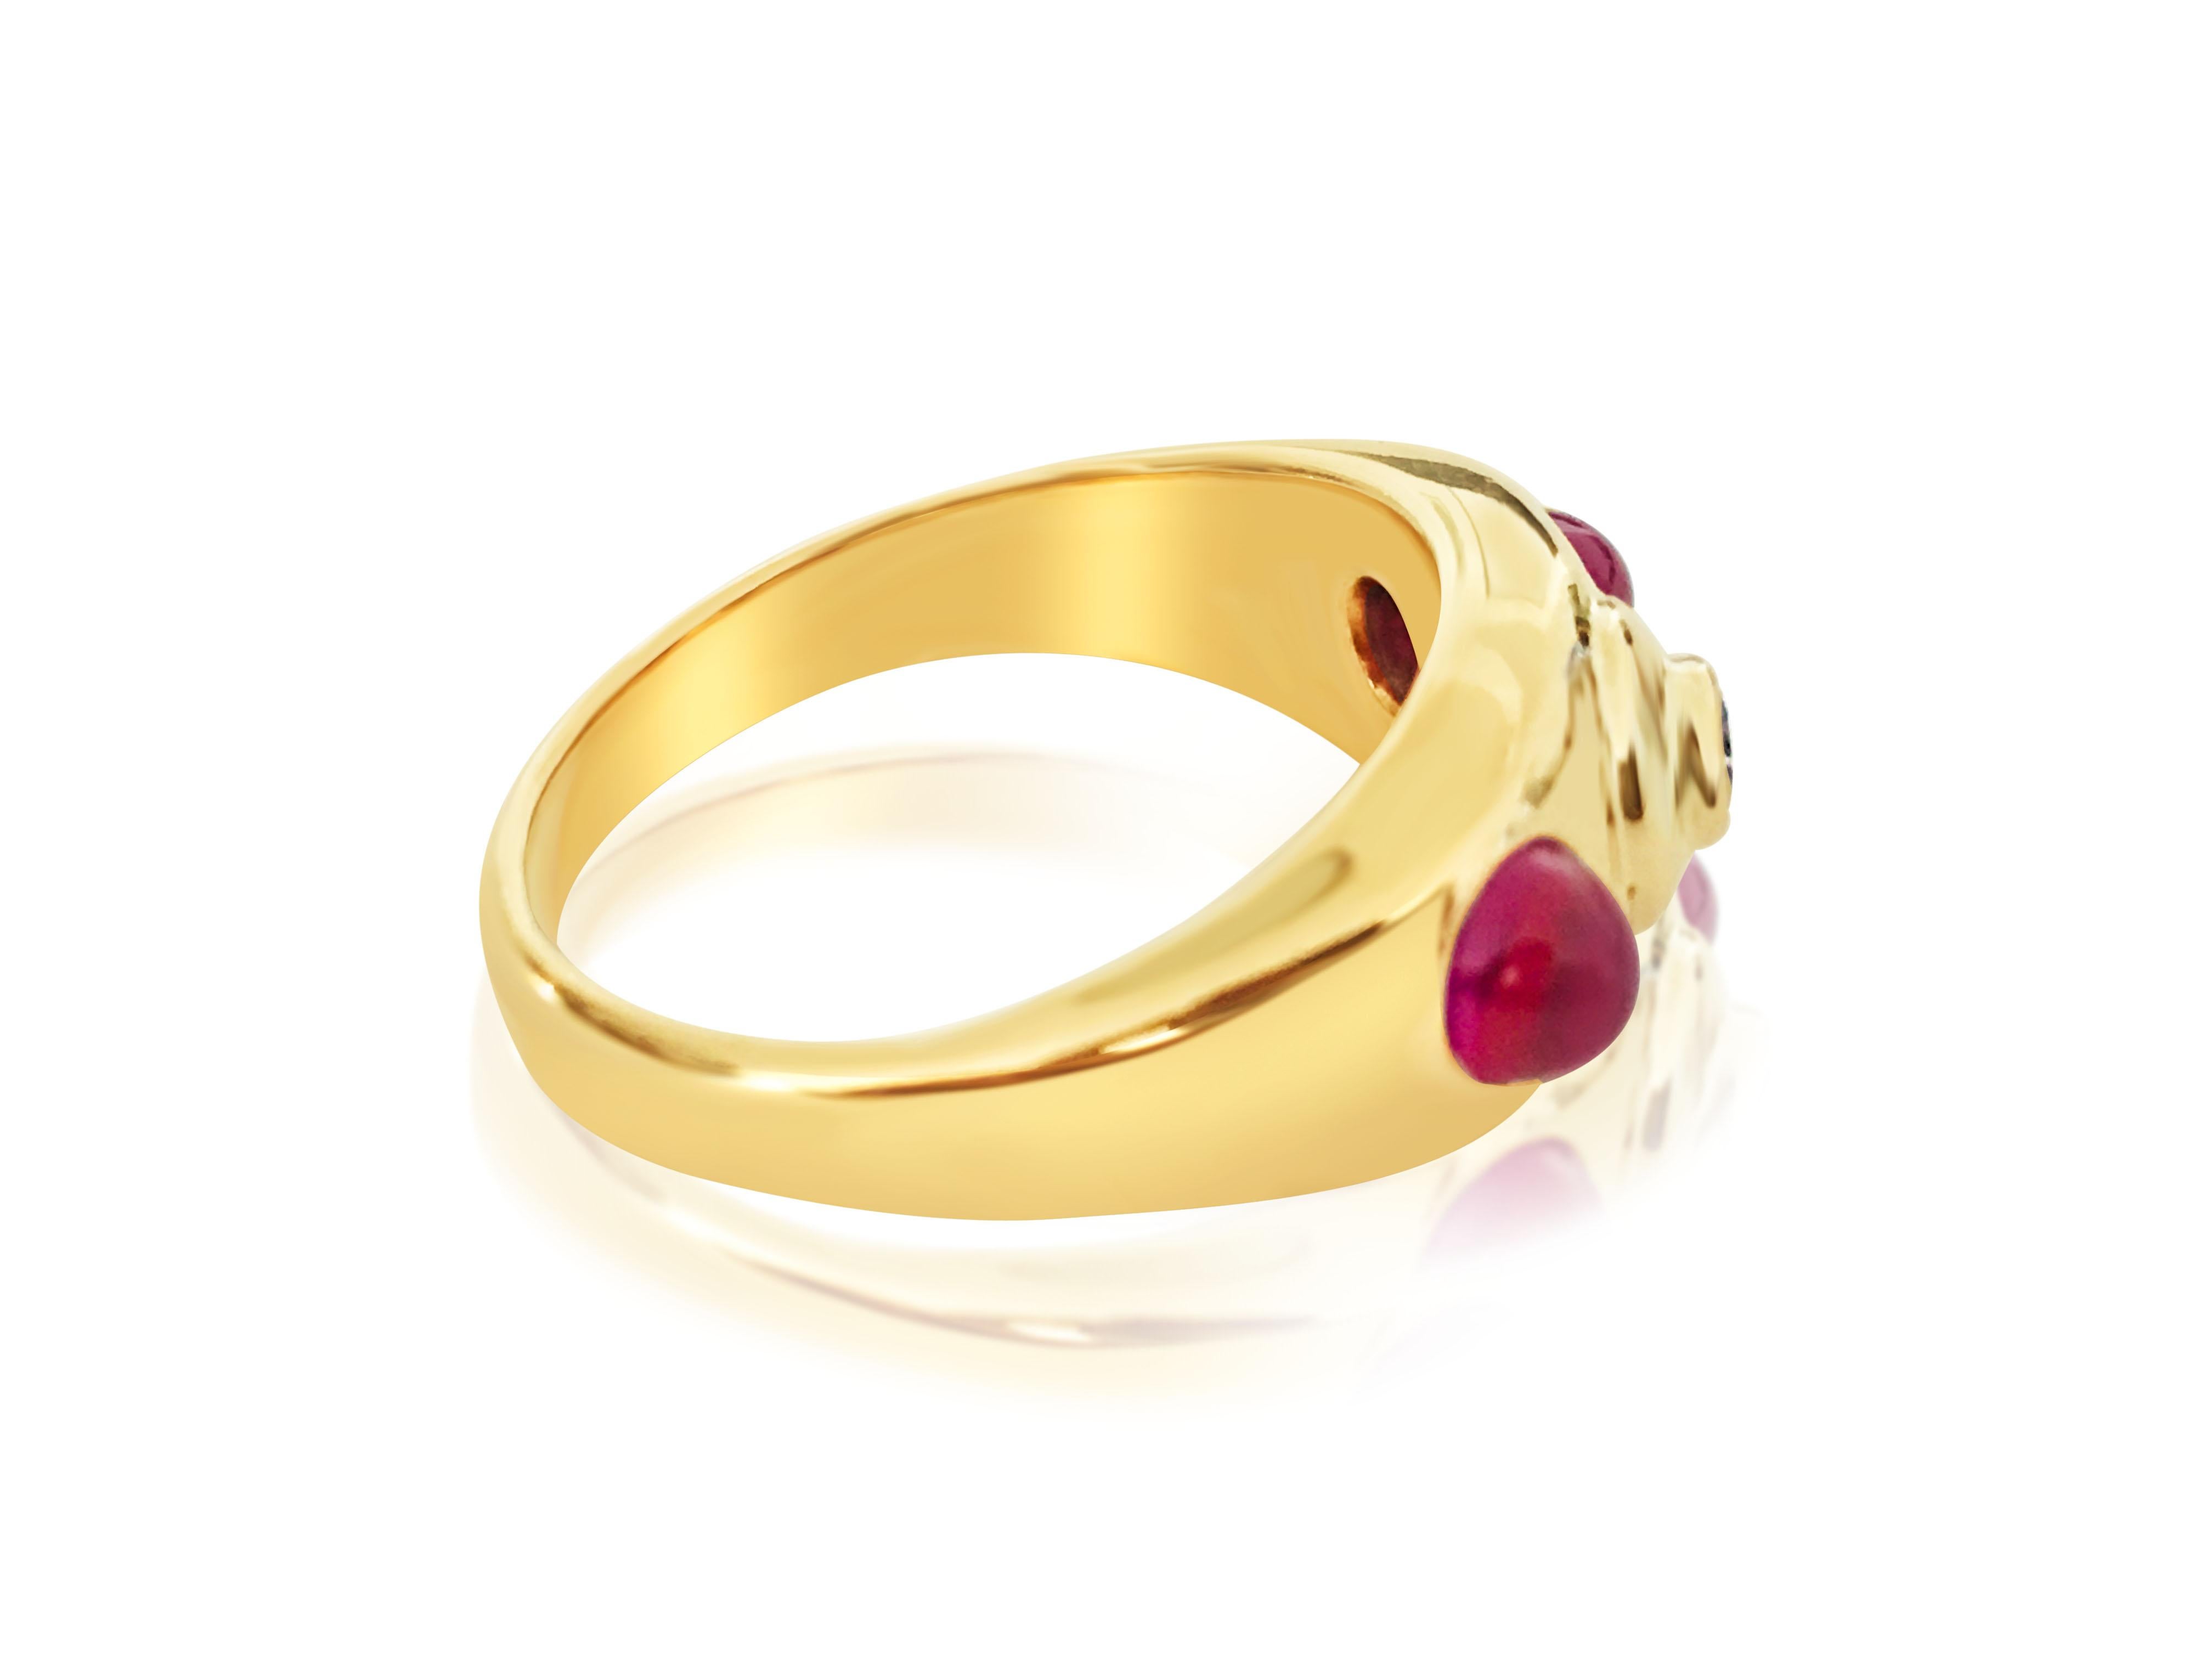 Cabochon Vintage 14k Gold Ruby Diamond 3 Stone Ring For Sale